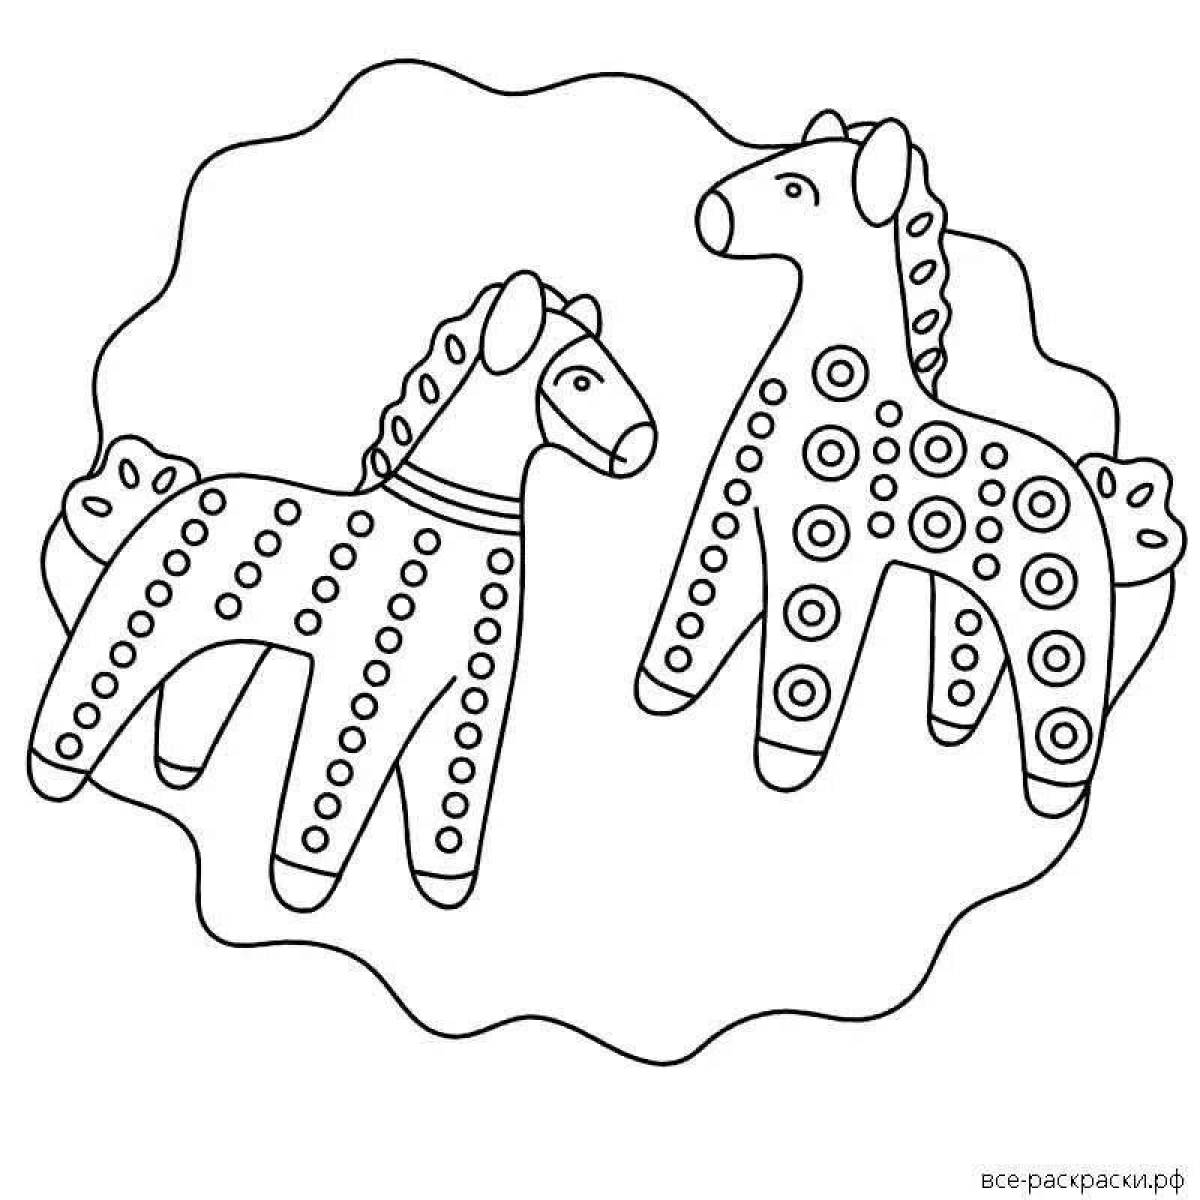 Entertaining coloring of the Dymkovo horse for children